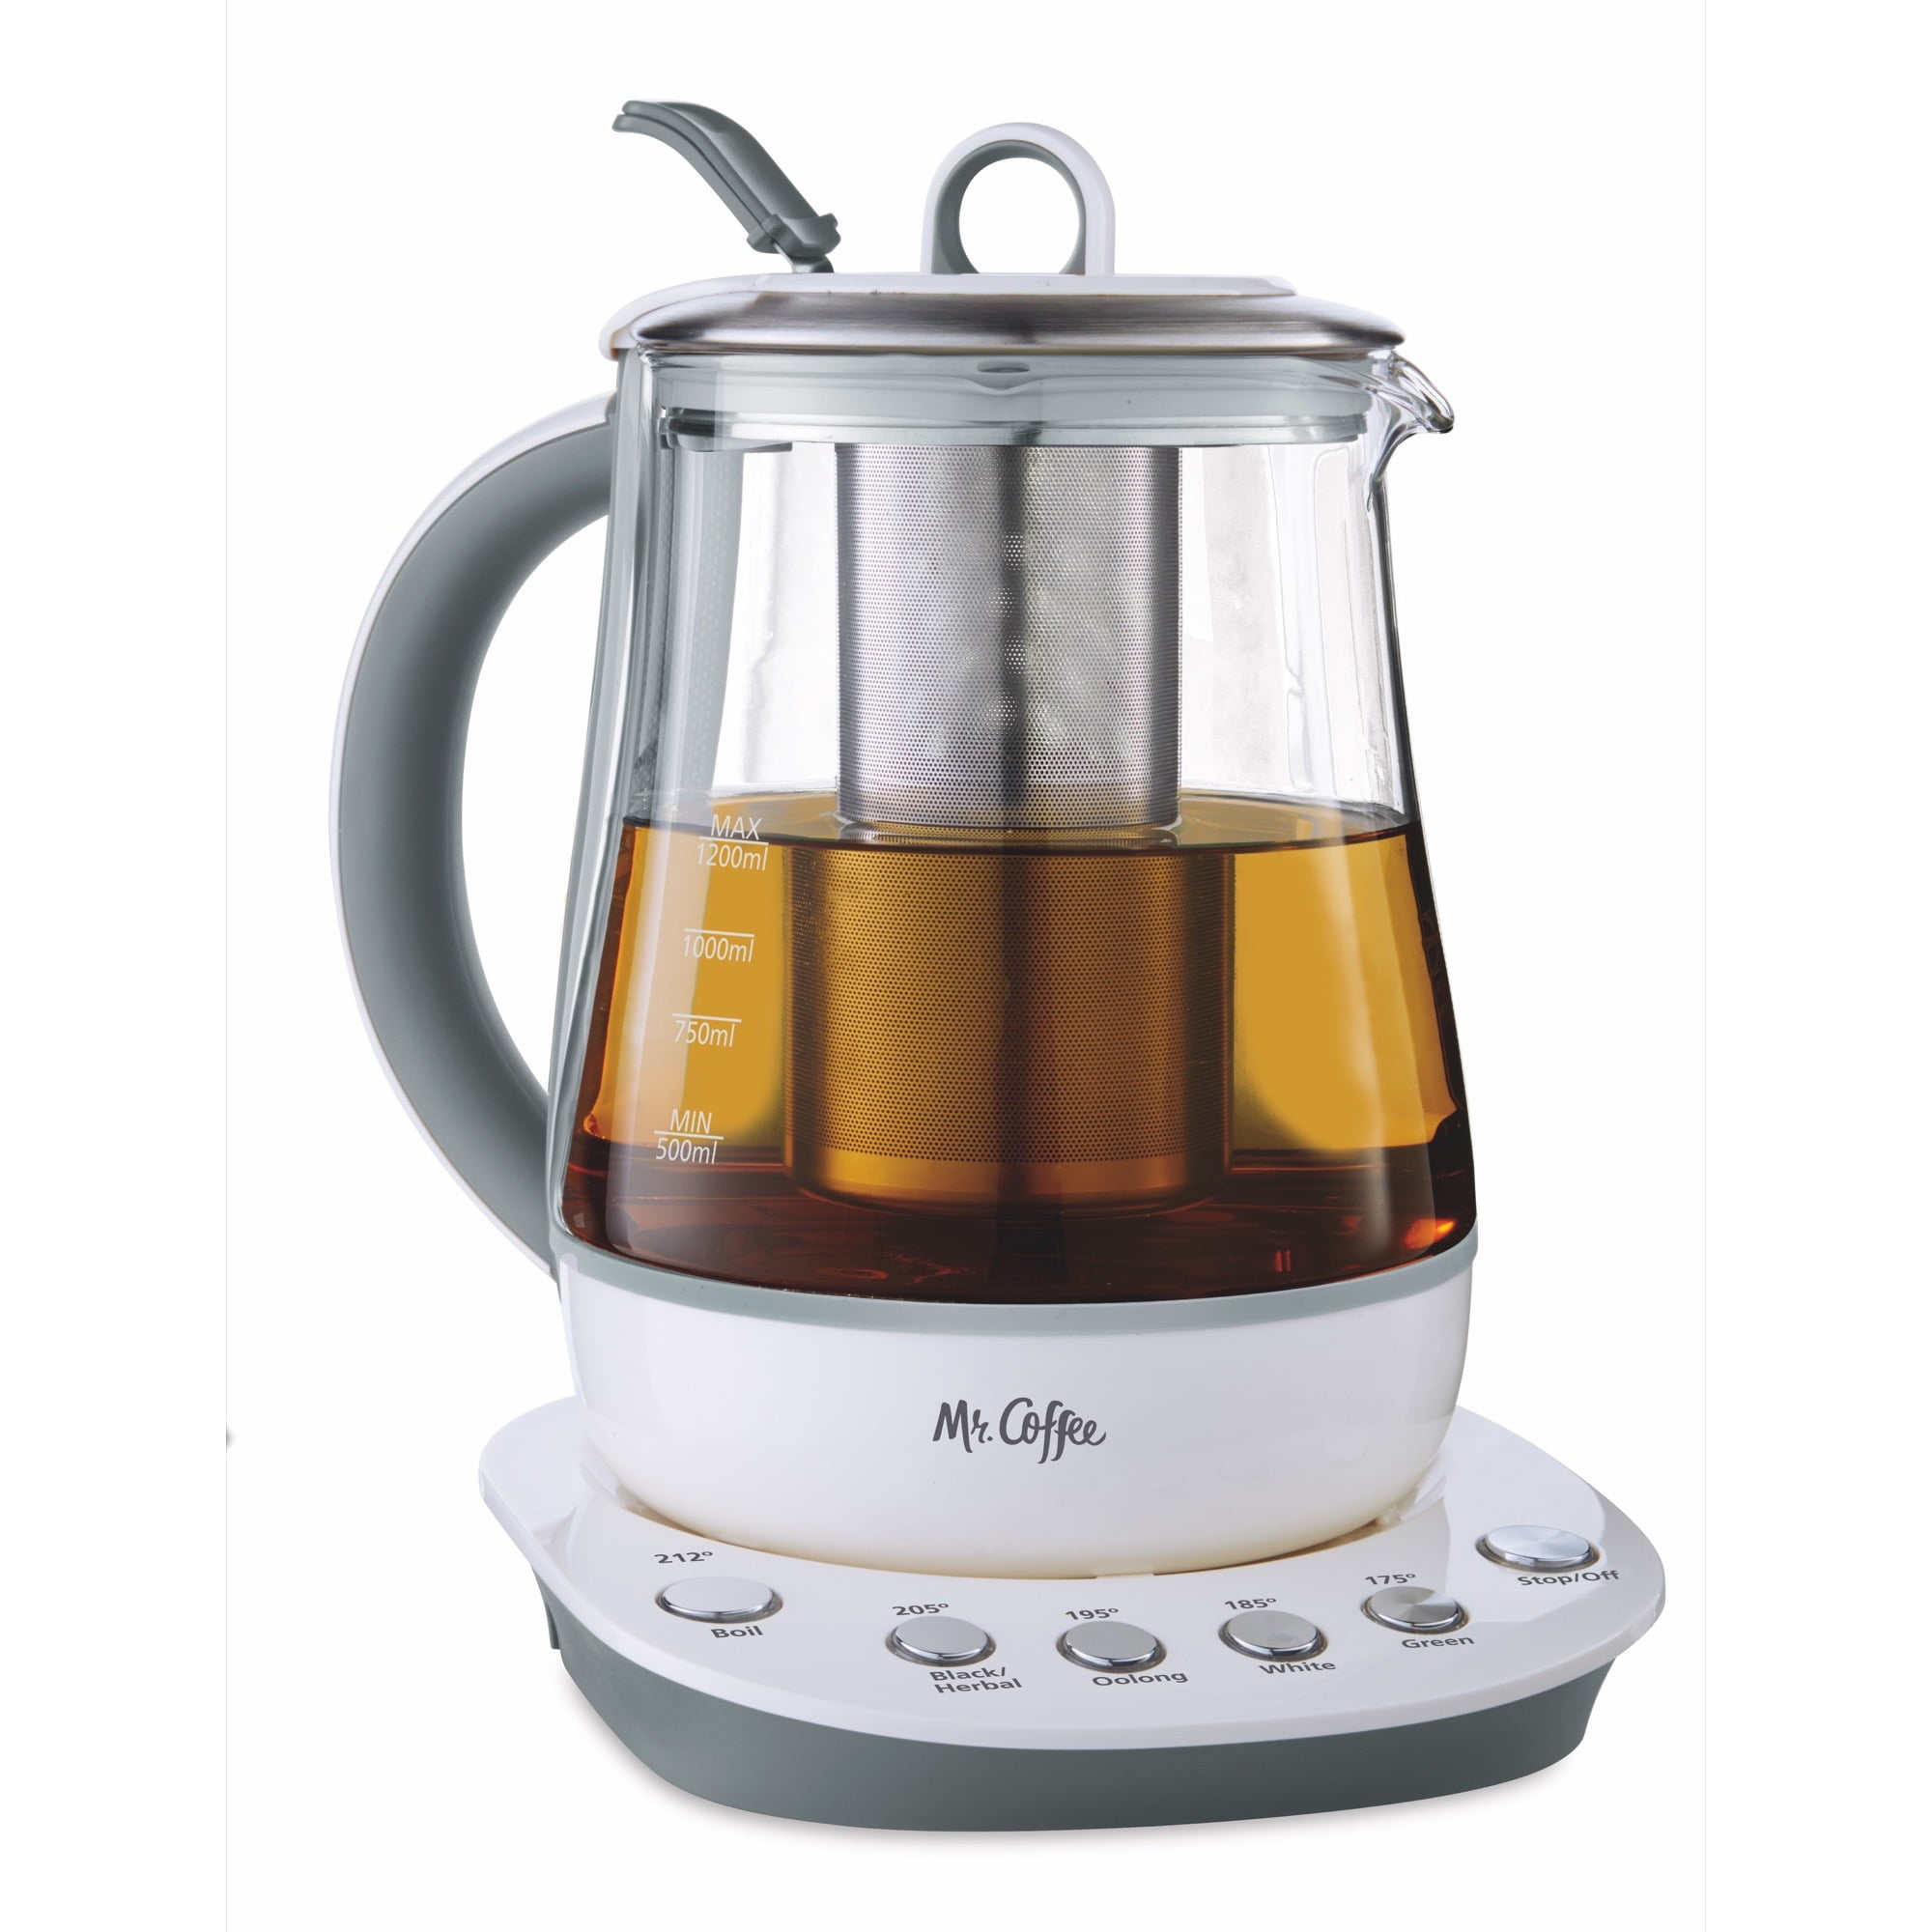 MRS TEA Automatic Hot Tea Maker by Mr Coffee 6 Cup HTM-1